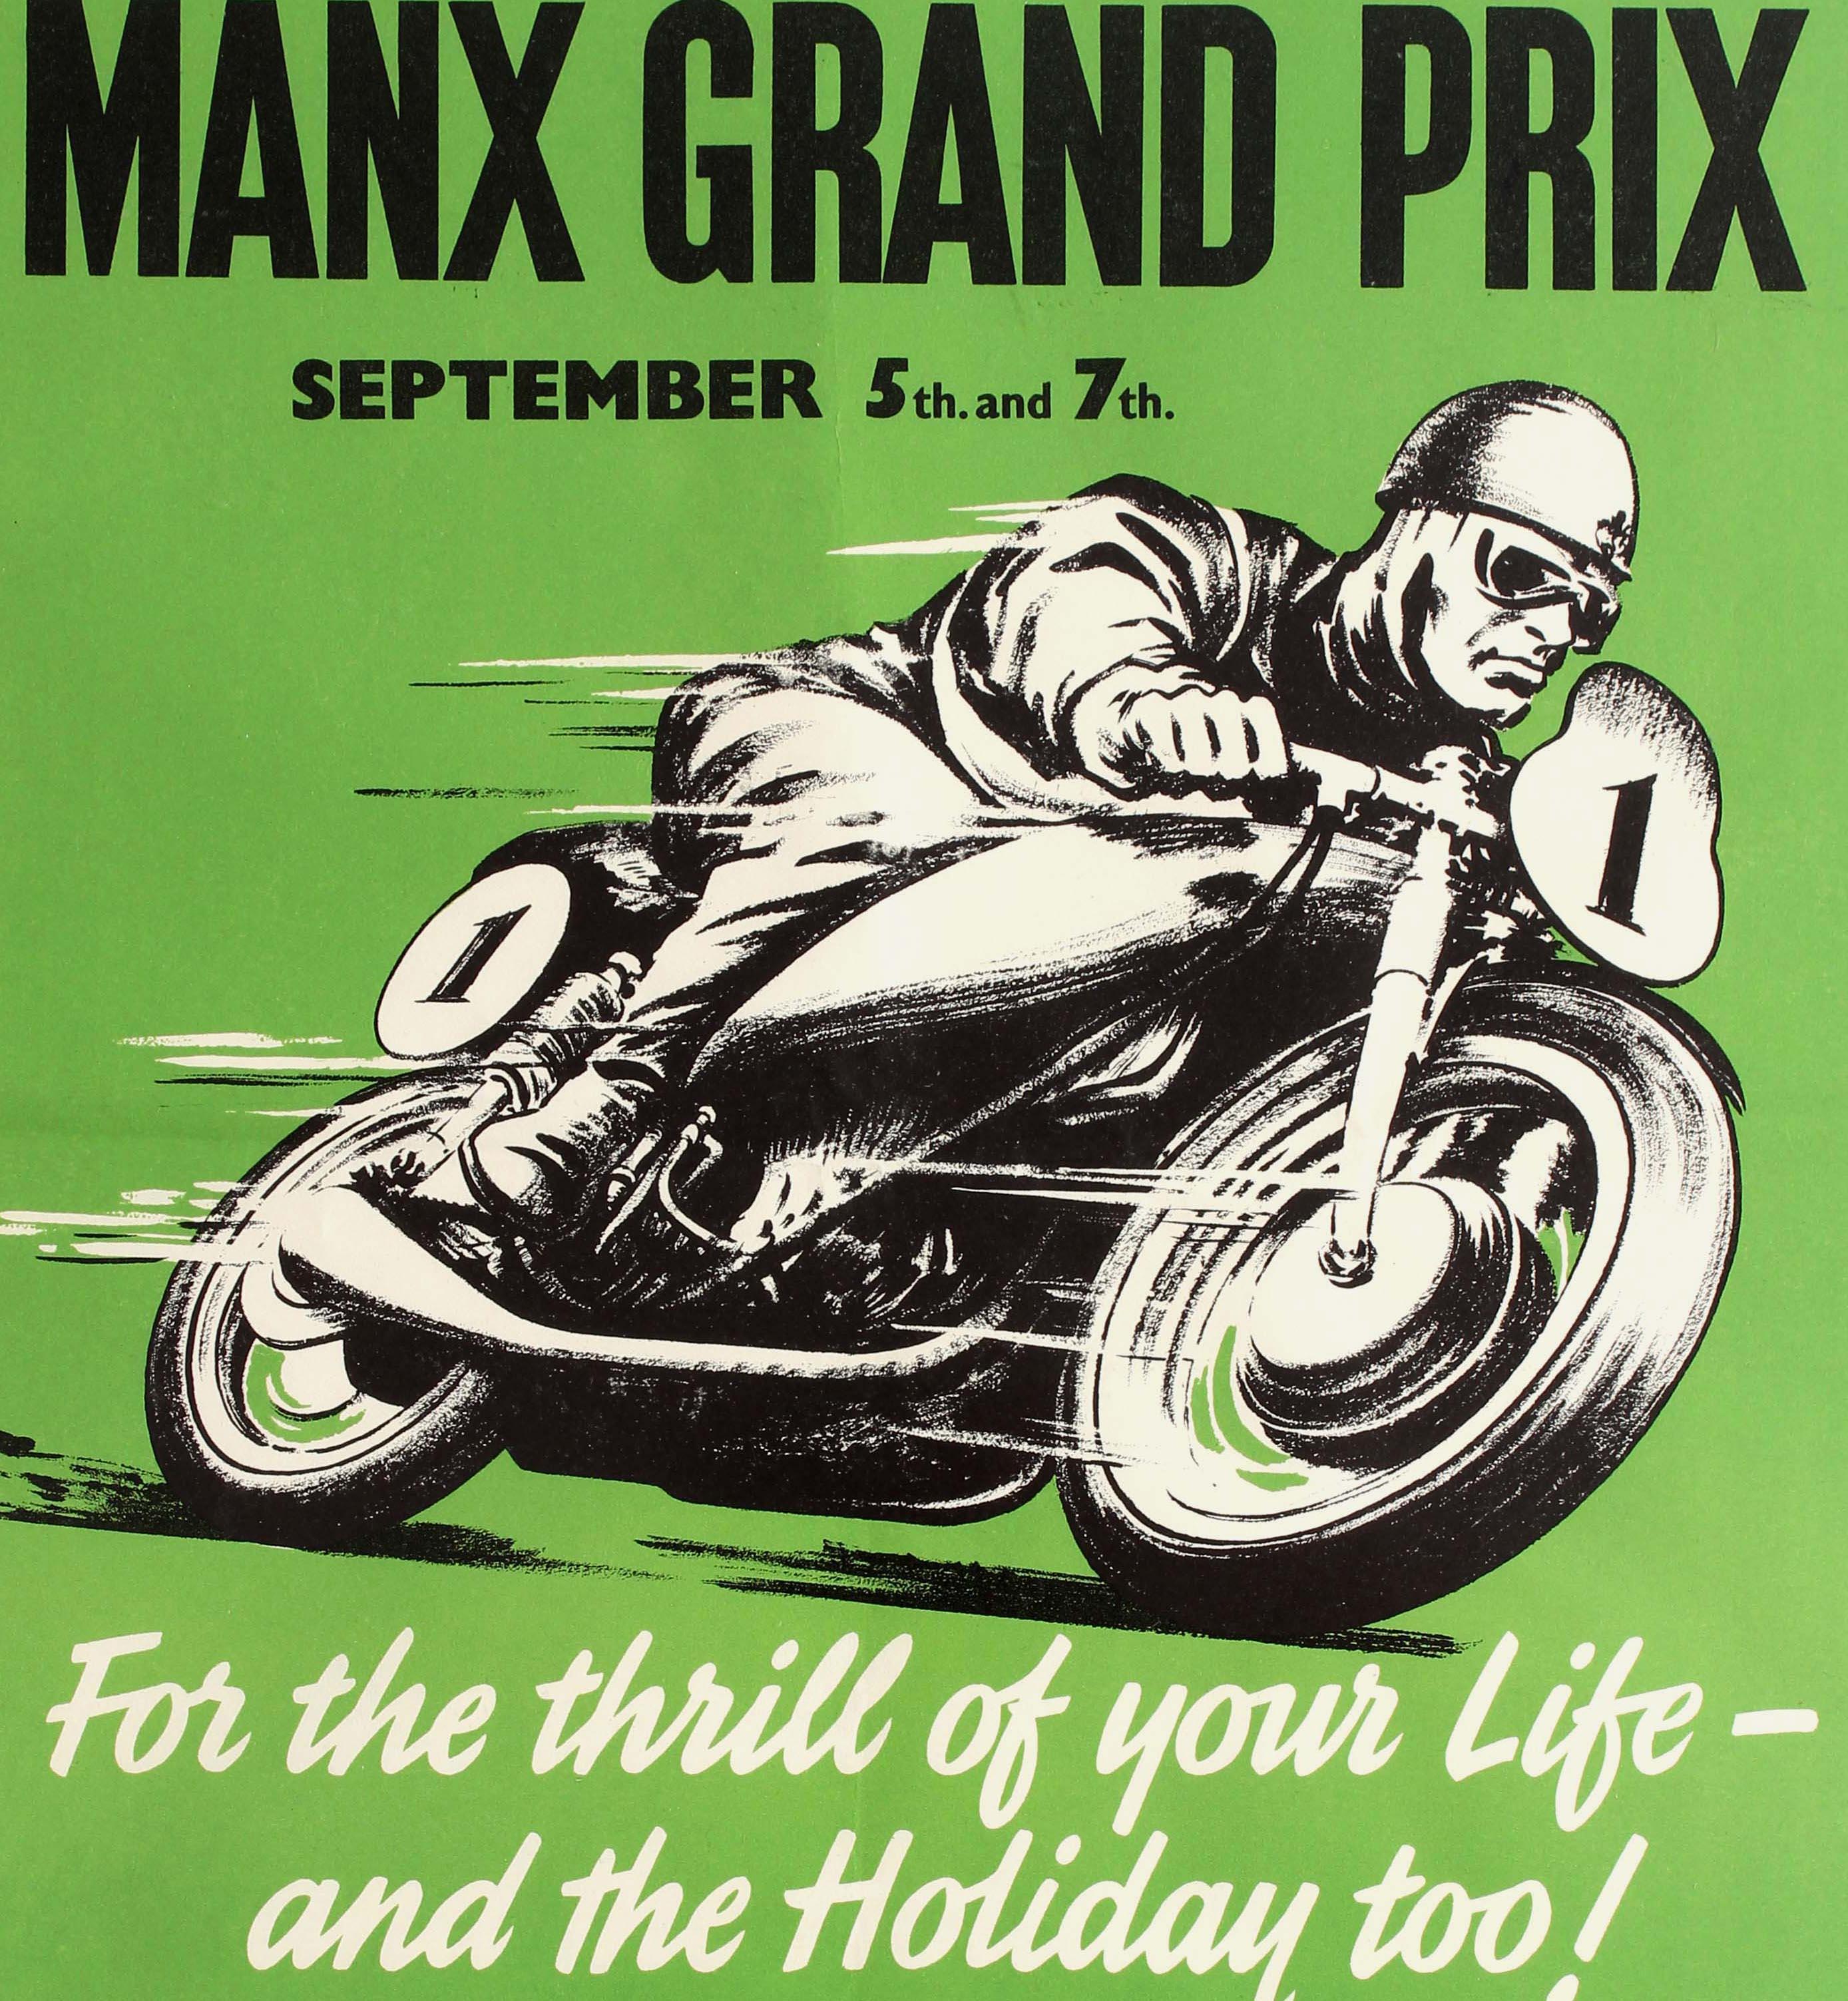 Rare original vintage Manx Grand Prix poster: For the thrill of your life - and the Holiday too! 5 and 7 September 1961. Dynamic image on a green background featuring a motorcyclist zooming by on a motorbike numbered 1 with the text above and below